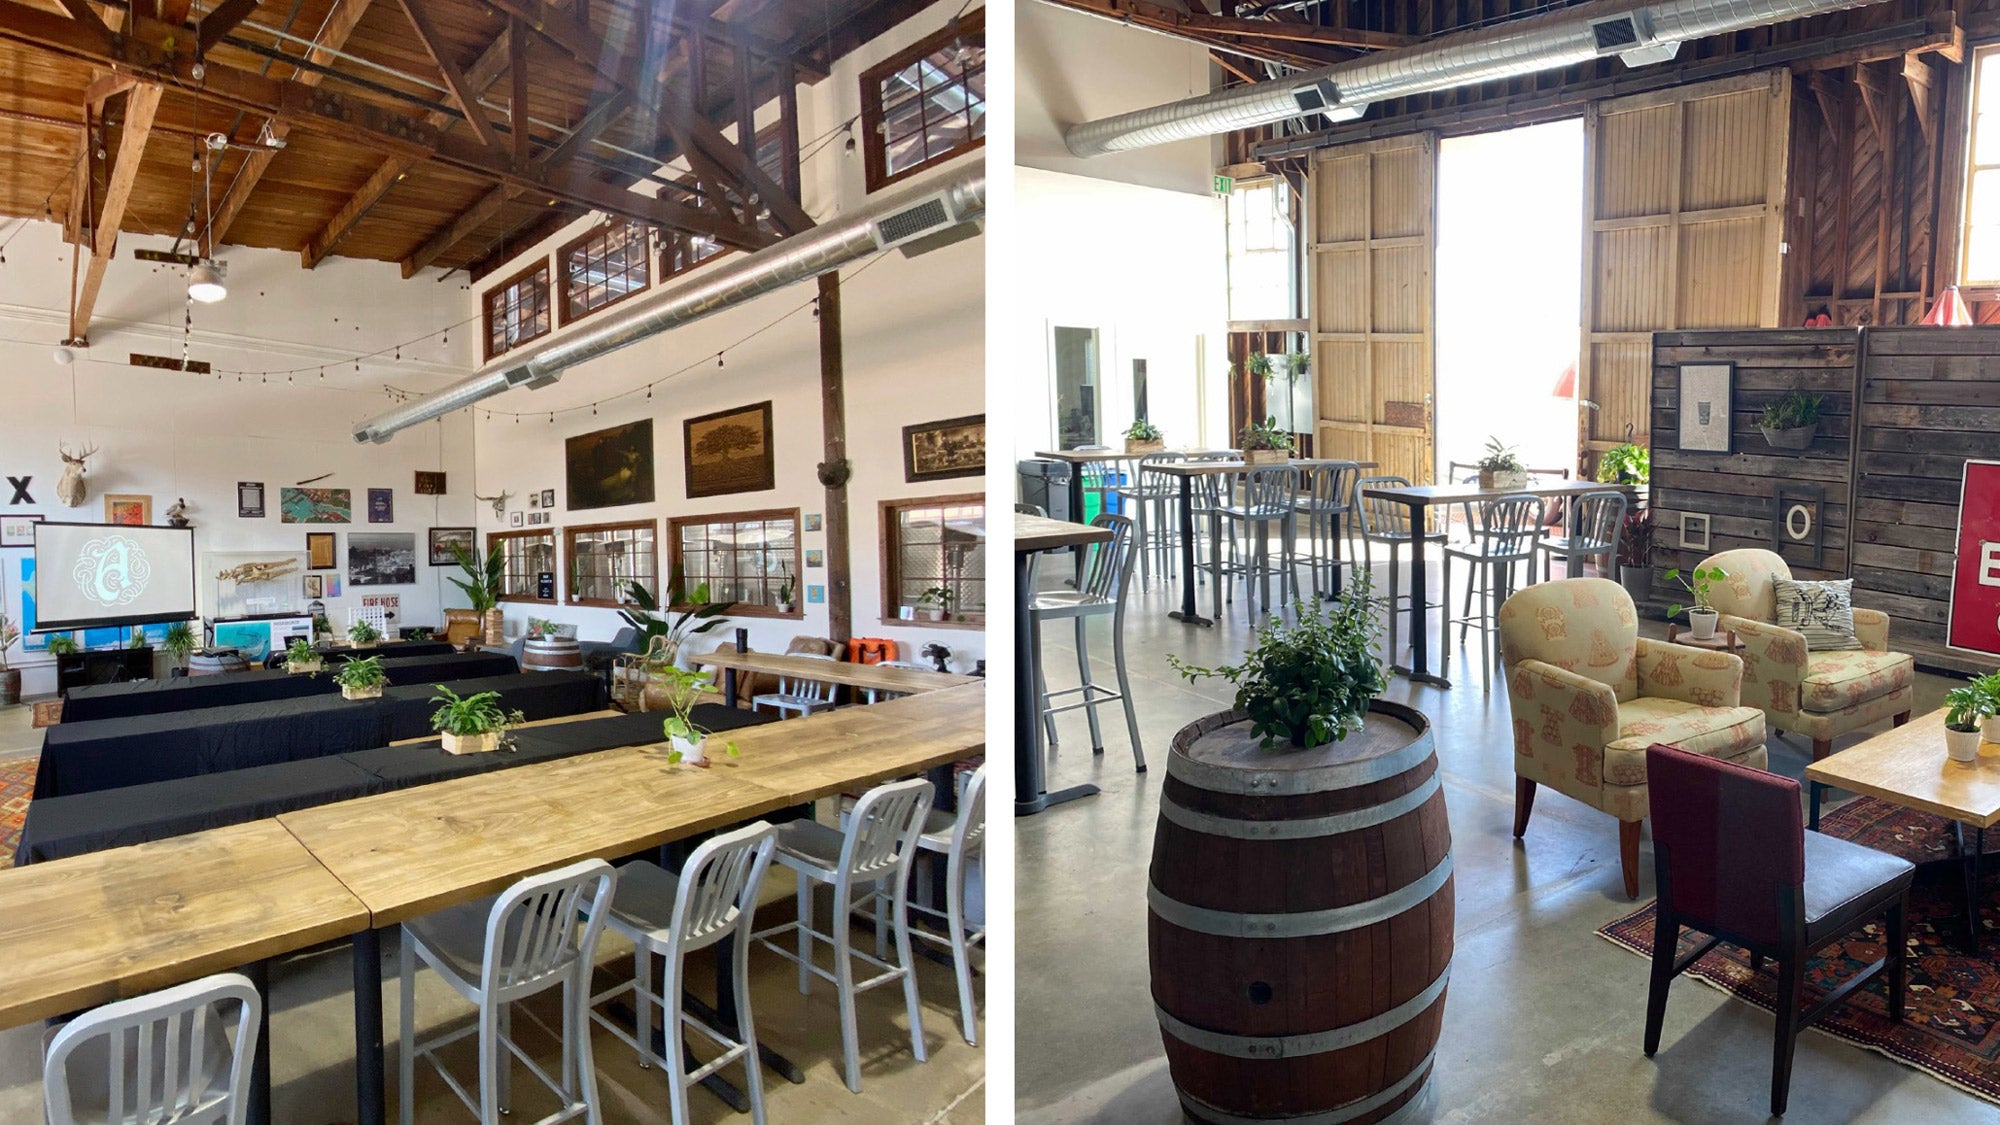 Lounge - Private Event Rental Space at Almanac Brewery